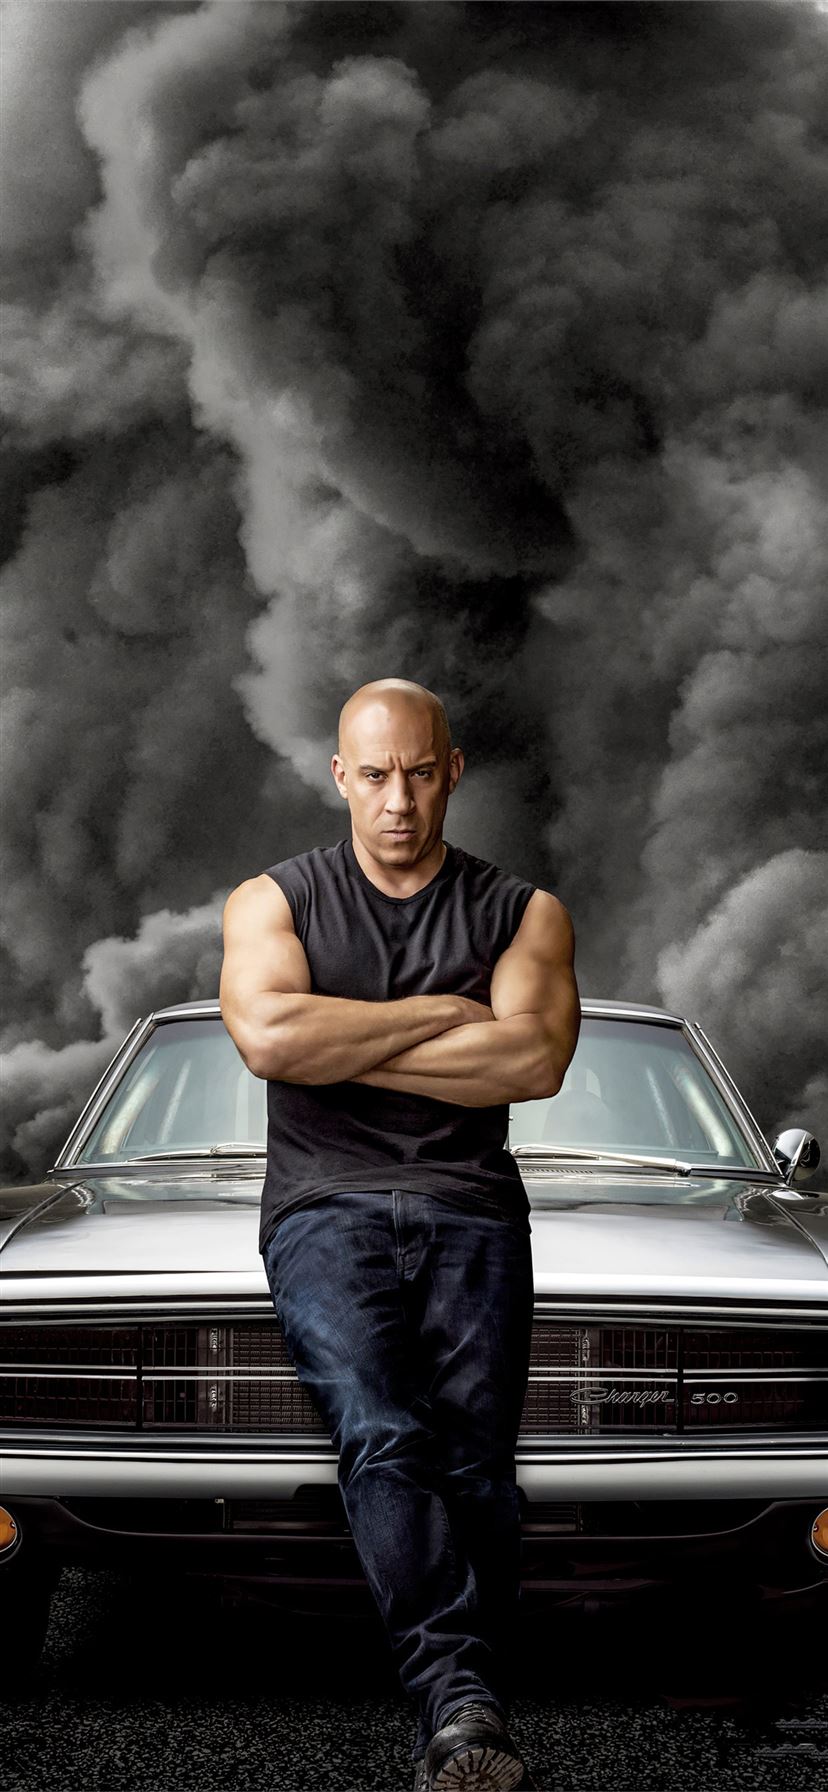 Best Fast and furious 9 iPhone 11 HD Wallpapers - iLikeWallpaper